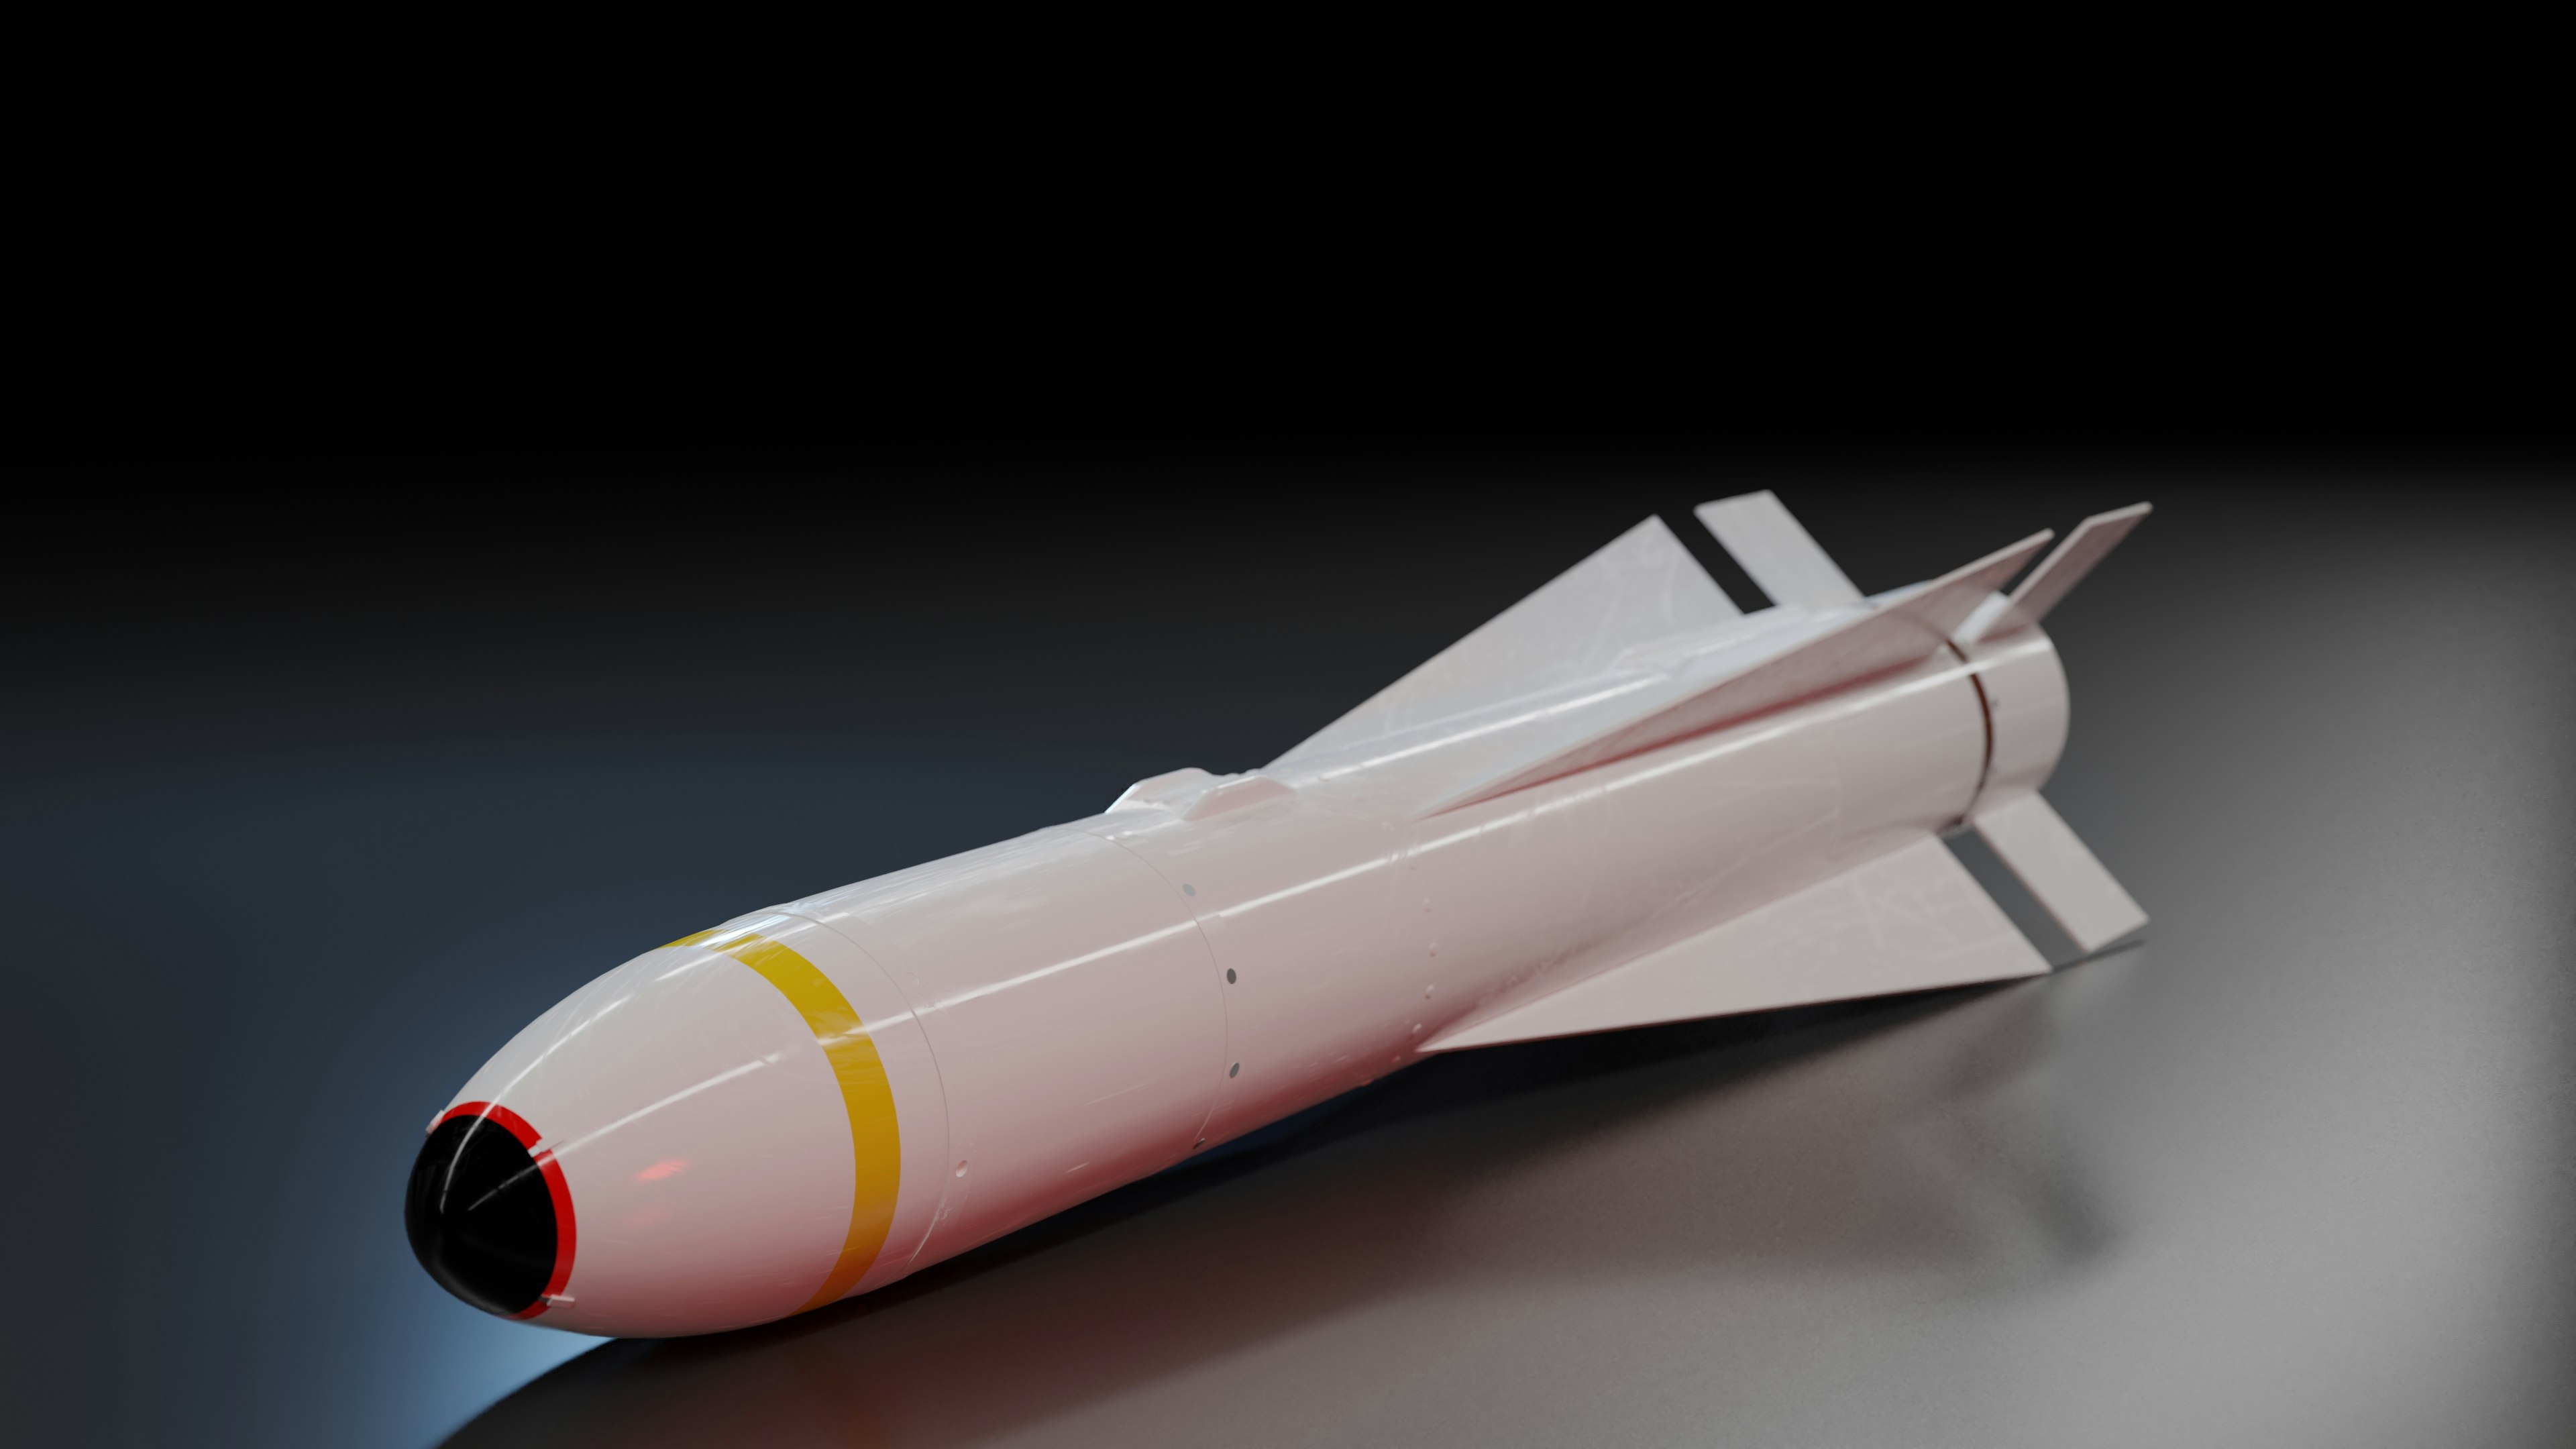 Blender render of an AGM-65A Maverick Air-to-Ground missile in 4k